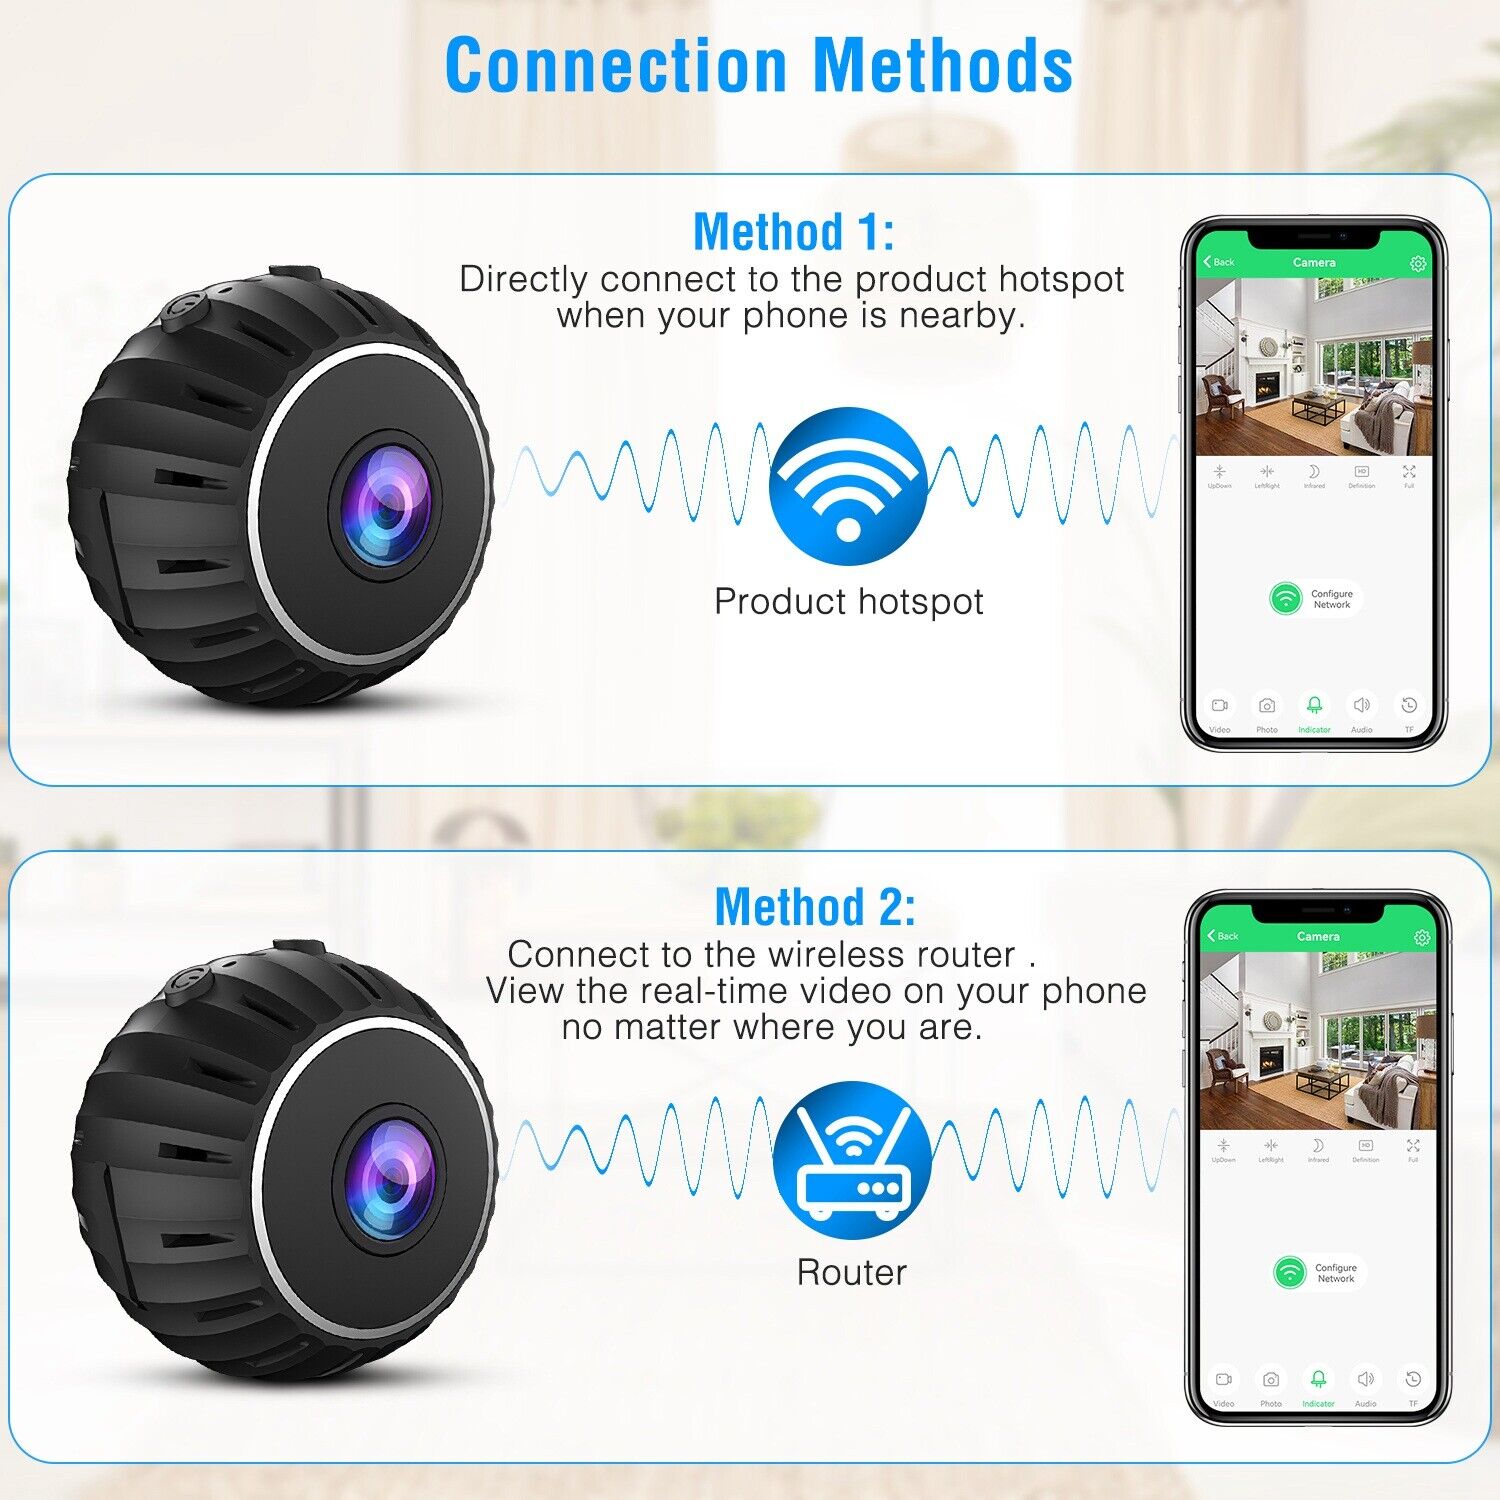 Security-Cameras-Mini-Camera-for-Home-Security-1080p-HD-Mini-IR-Camera-WiFi-Wireless-Small-Indoor-Nanny-Camera-Cell-Phone-APP-Control-with-A-Wide-Angle-Remote-View-23